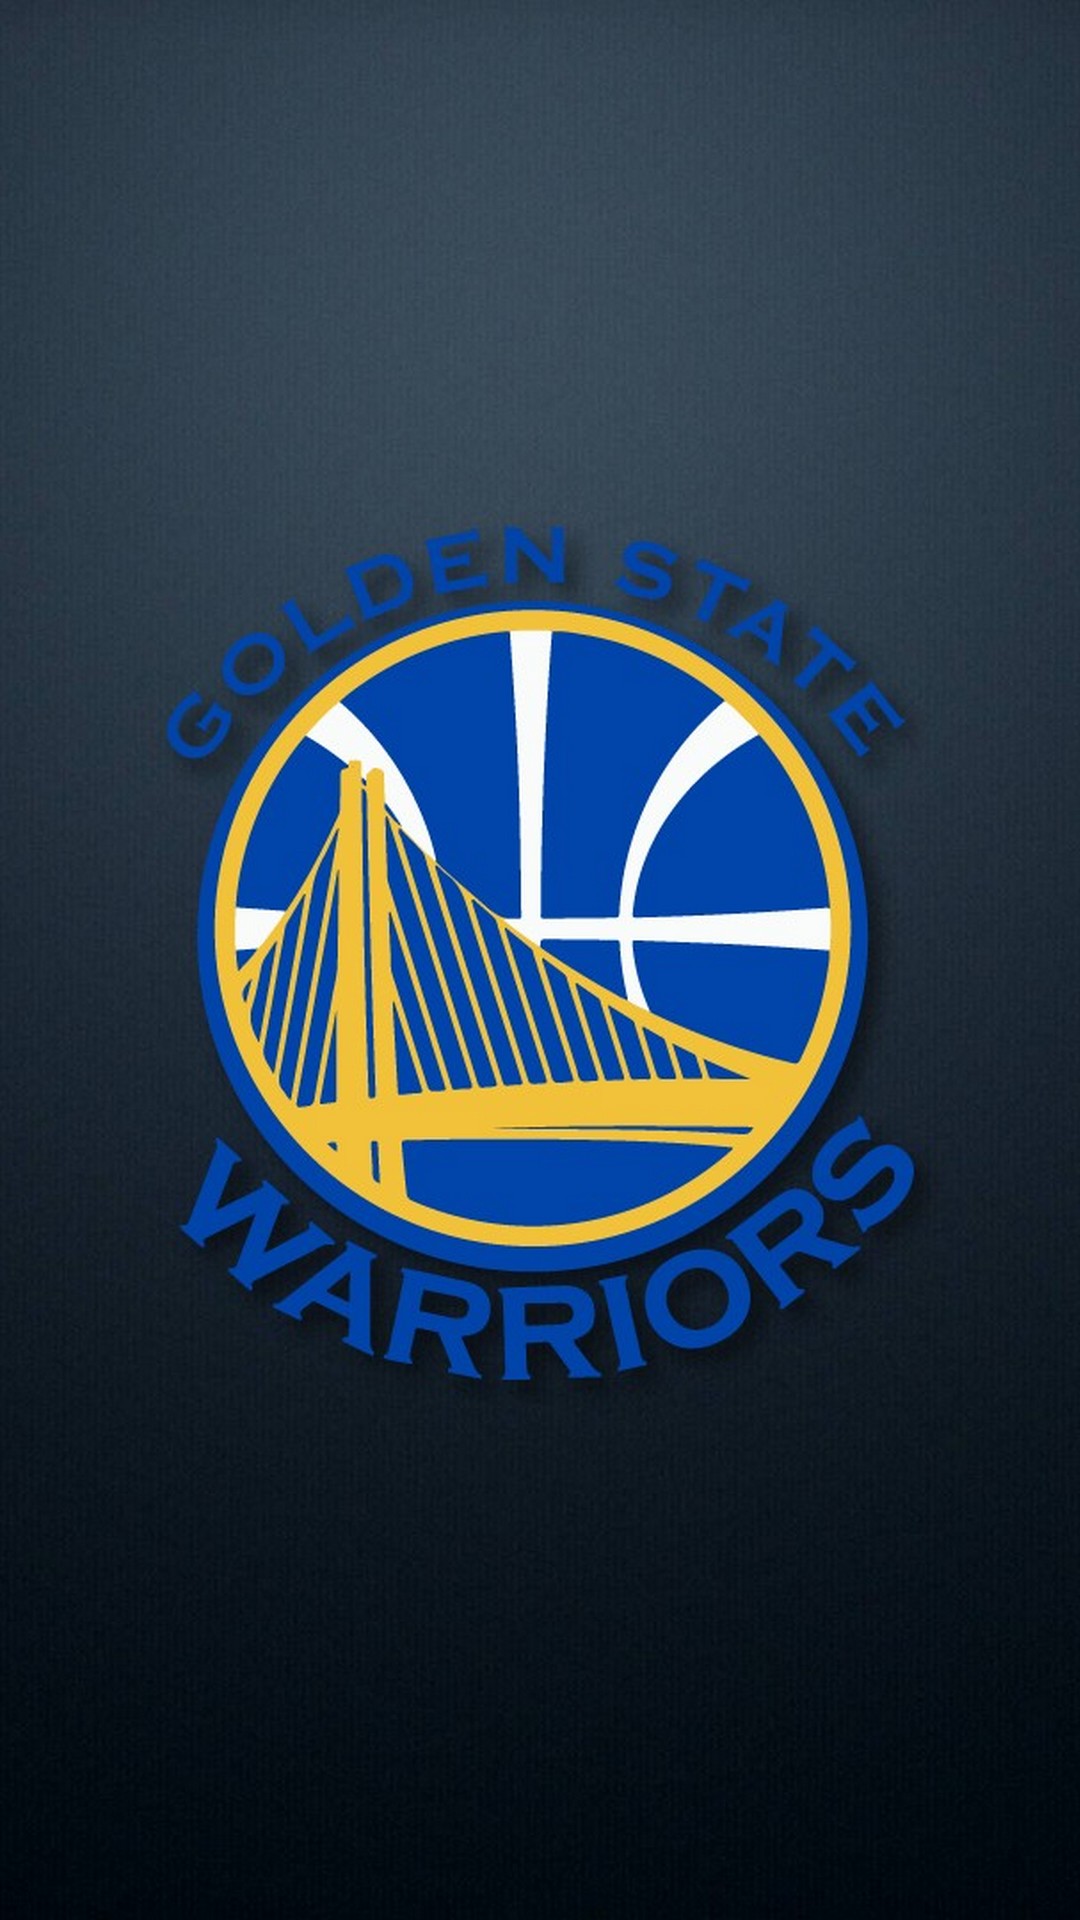 Wallpaper Golden State Warriors iPhone with image resolution 1080x1920 pixel. You can make this wallpaper for your iPhone 5, 6, 7, 8, X backgrounds, Mobile Screensaver, or iPad Lock Screen